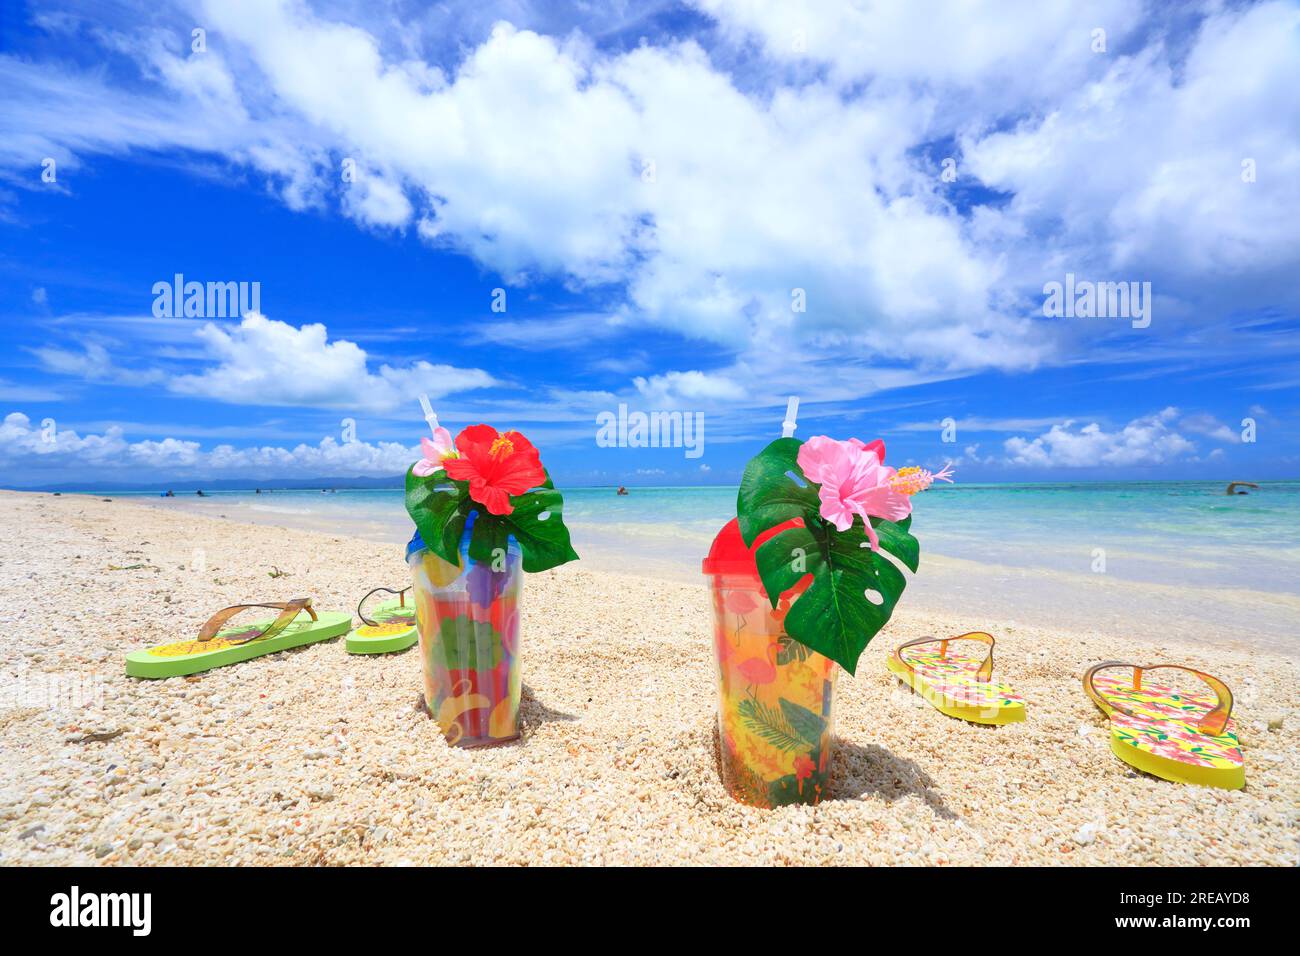 Image of a Beach in Okinawa Stock Photo